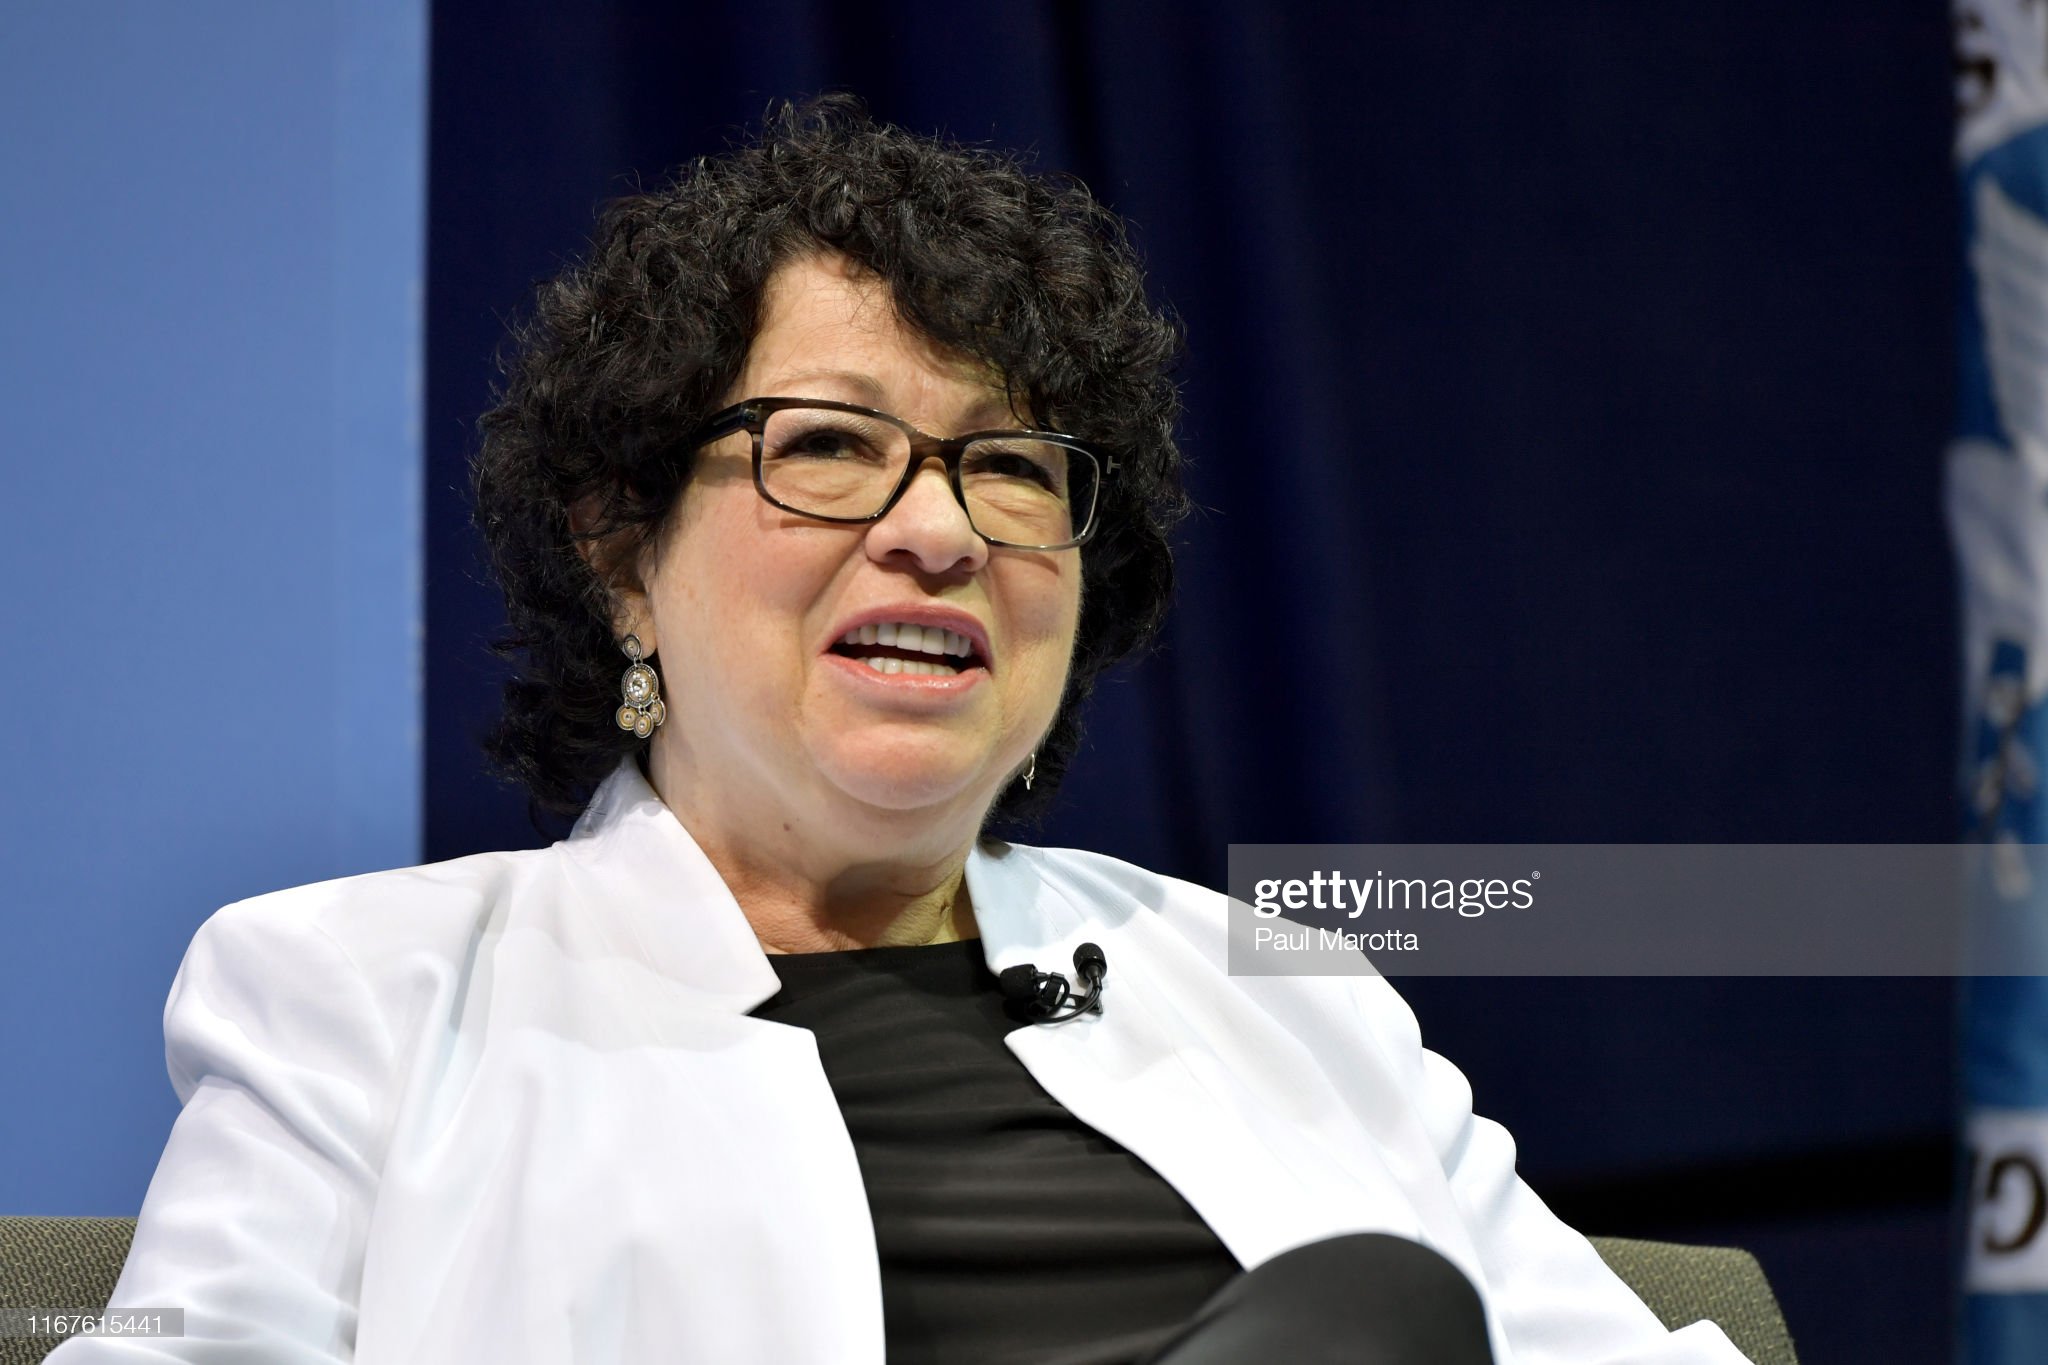 Is Marianna Sotomayor related to the Supreme Court justice? ABTC